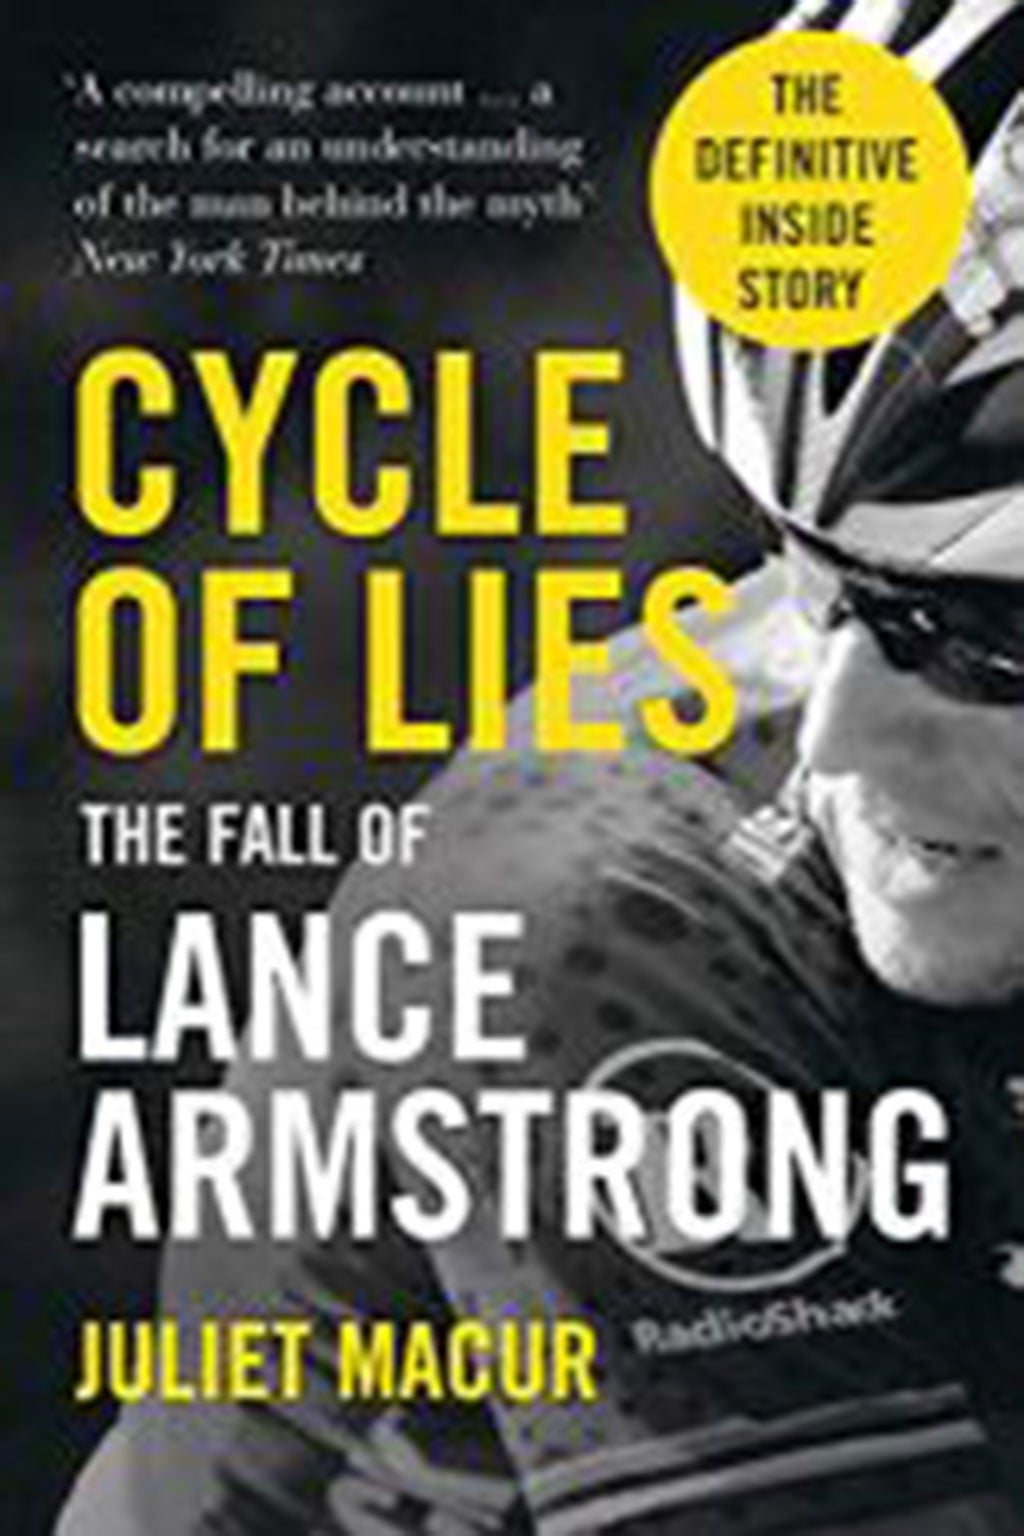 Cycle of Lies - The Fall of Lance Armstrong by Juliet Macur